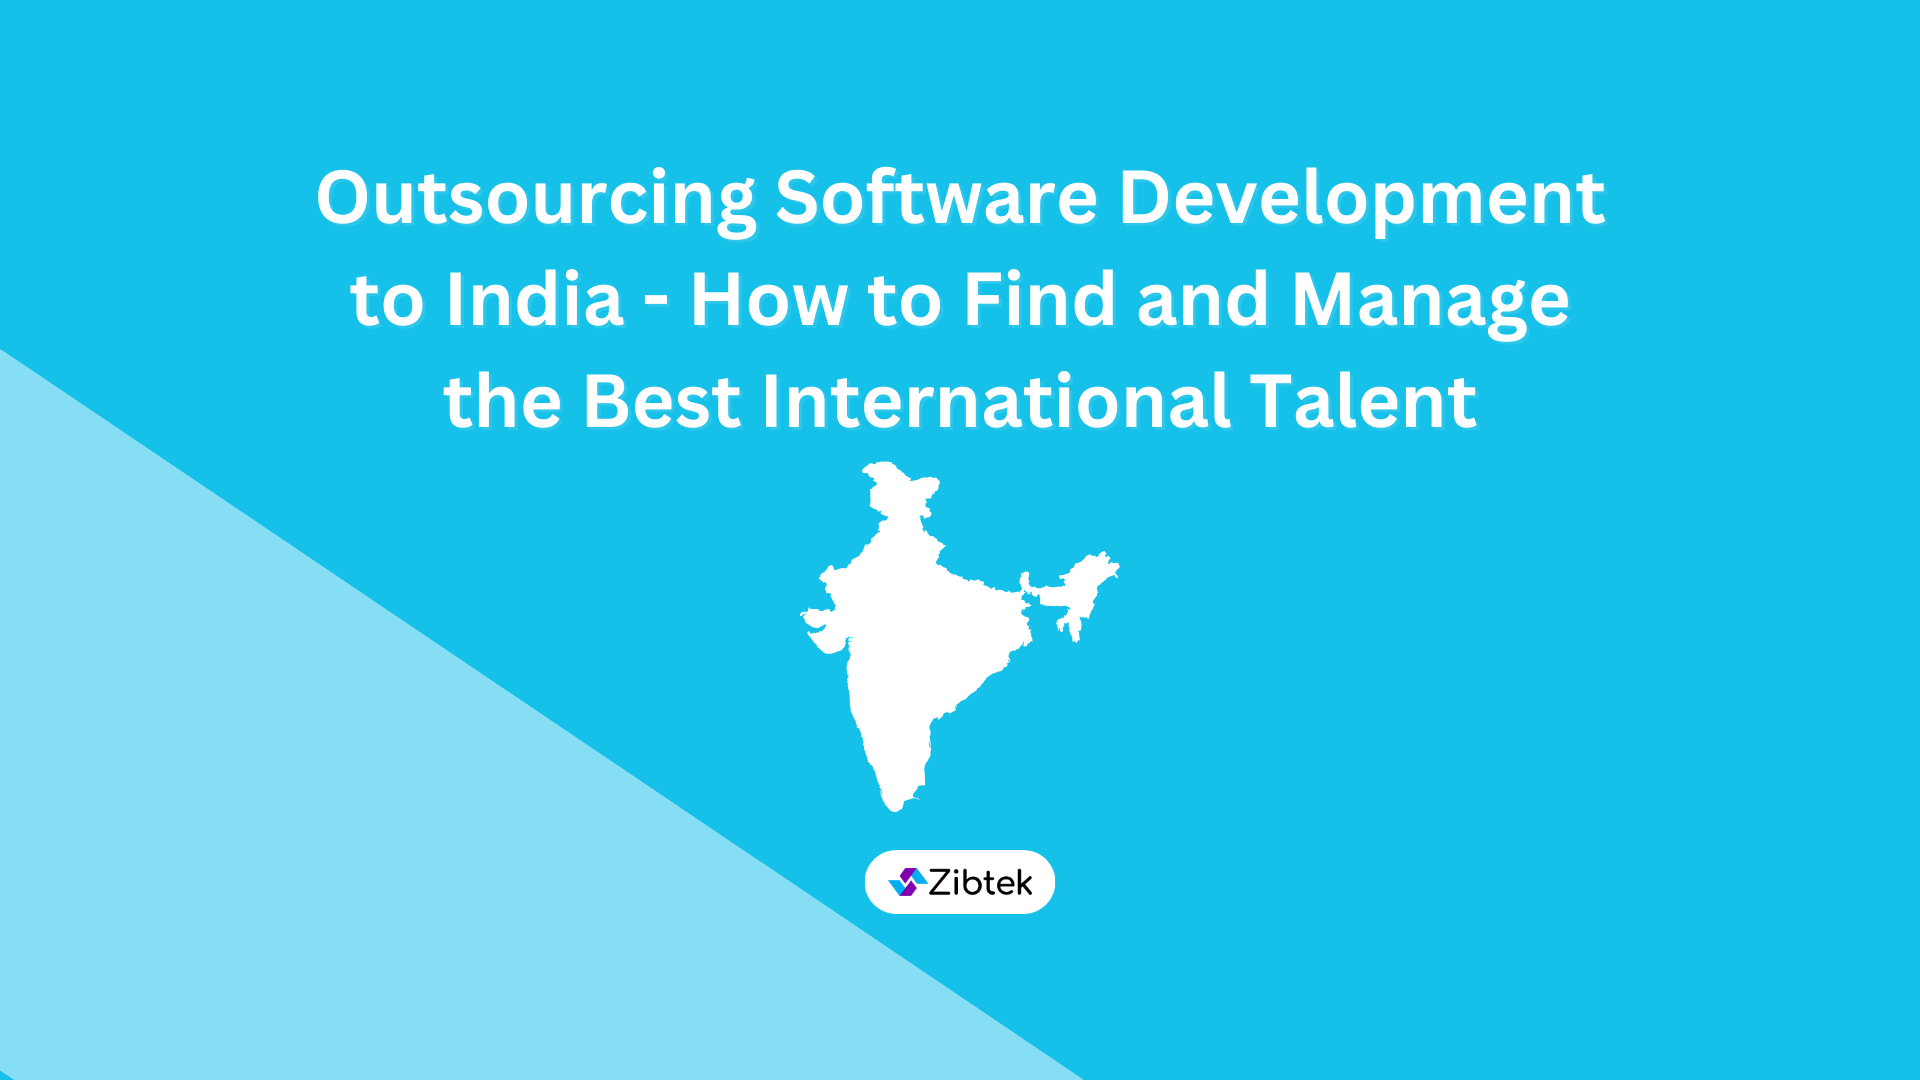 Outsourcing Software Development to India - How to Find and Manage the Best International Talent